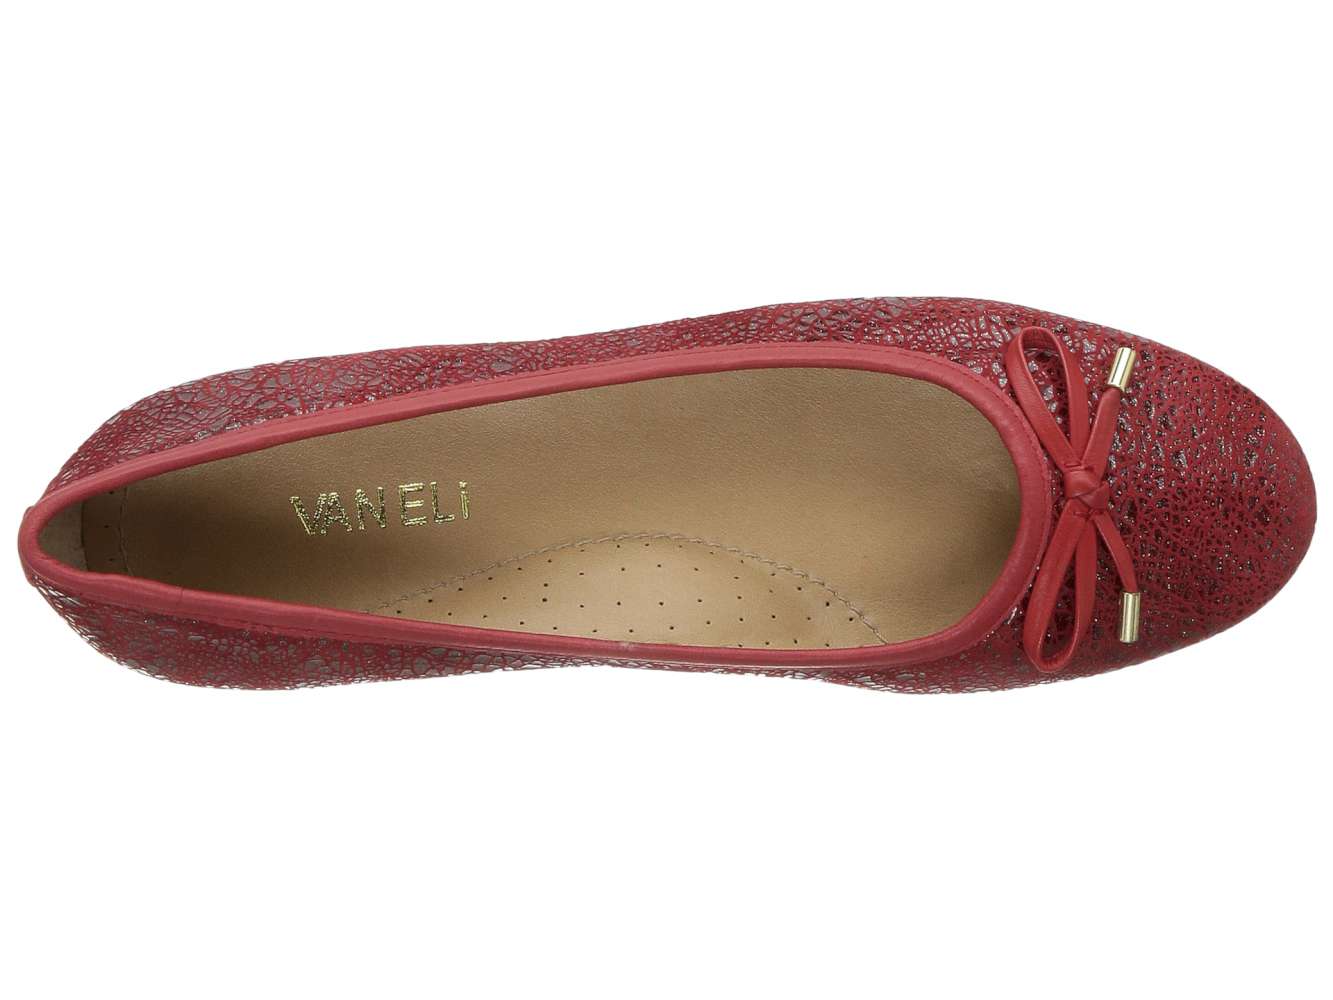 Vaneli Womens Ballet Flats in Red Color, Size 5.5 RXF 883992153424 | eBay